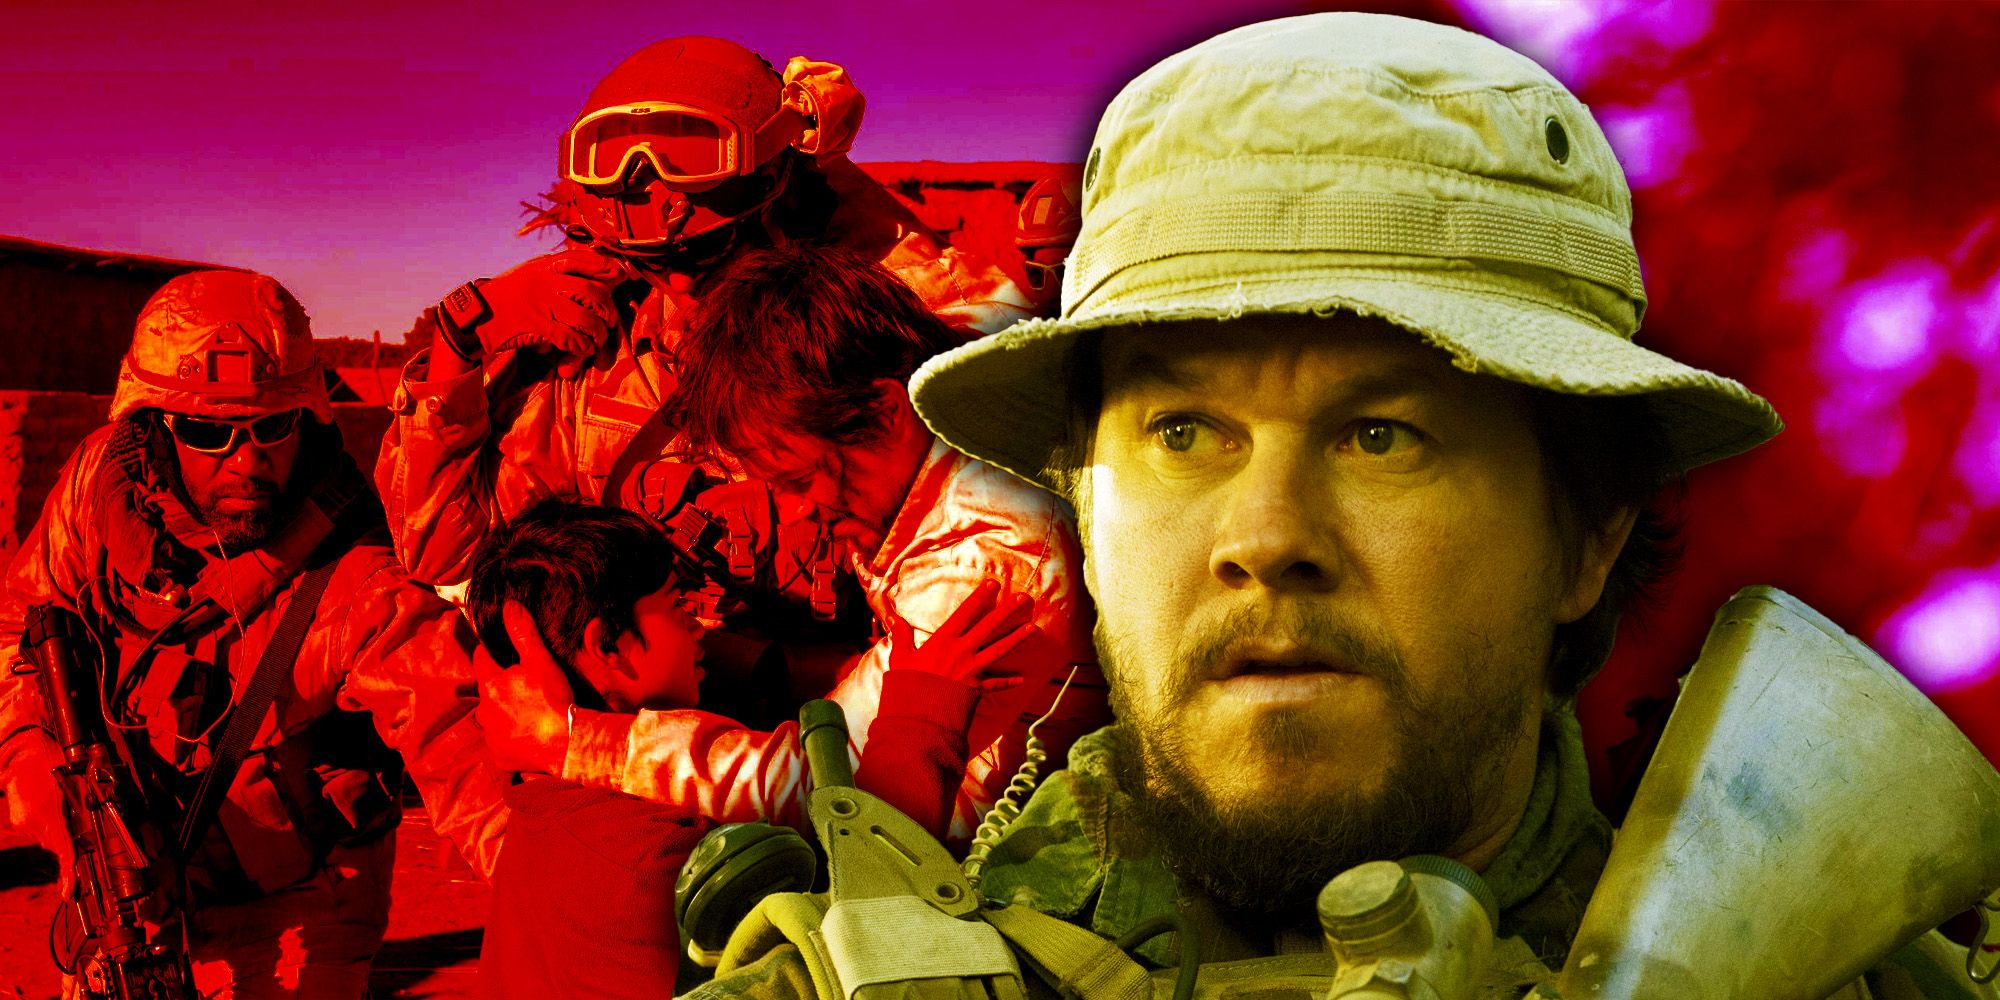 Lone Survivor Chronicles the Final Moments of Michael Murphy's Life